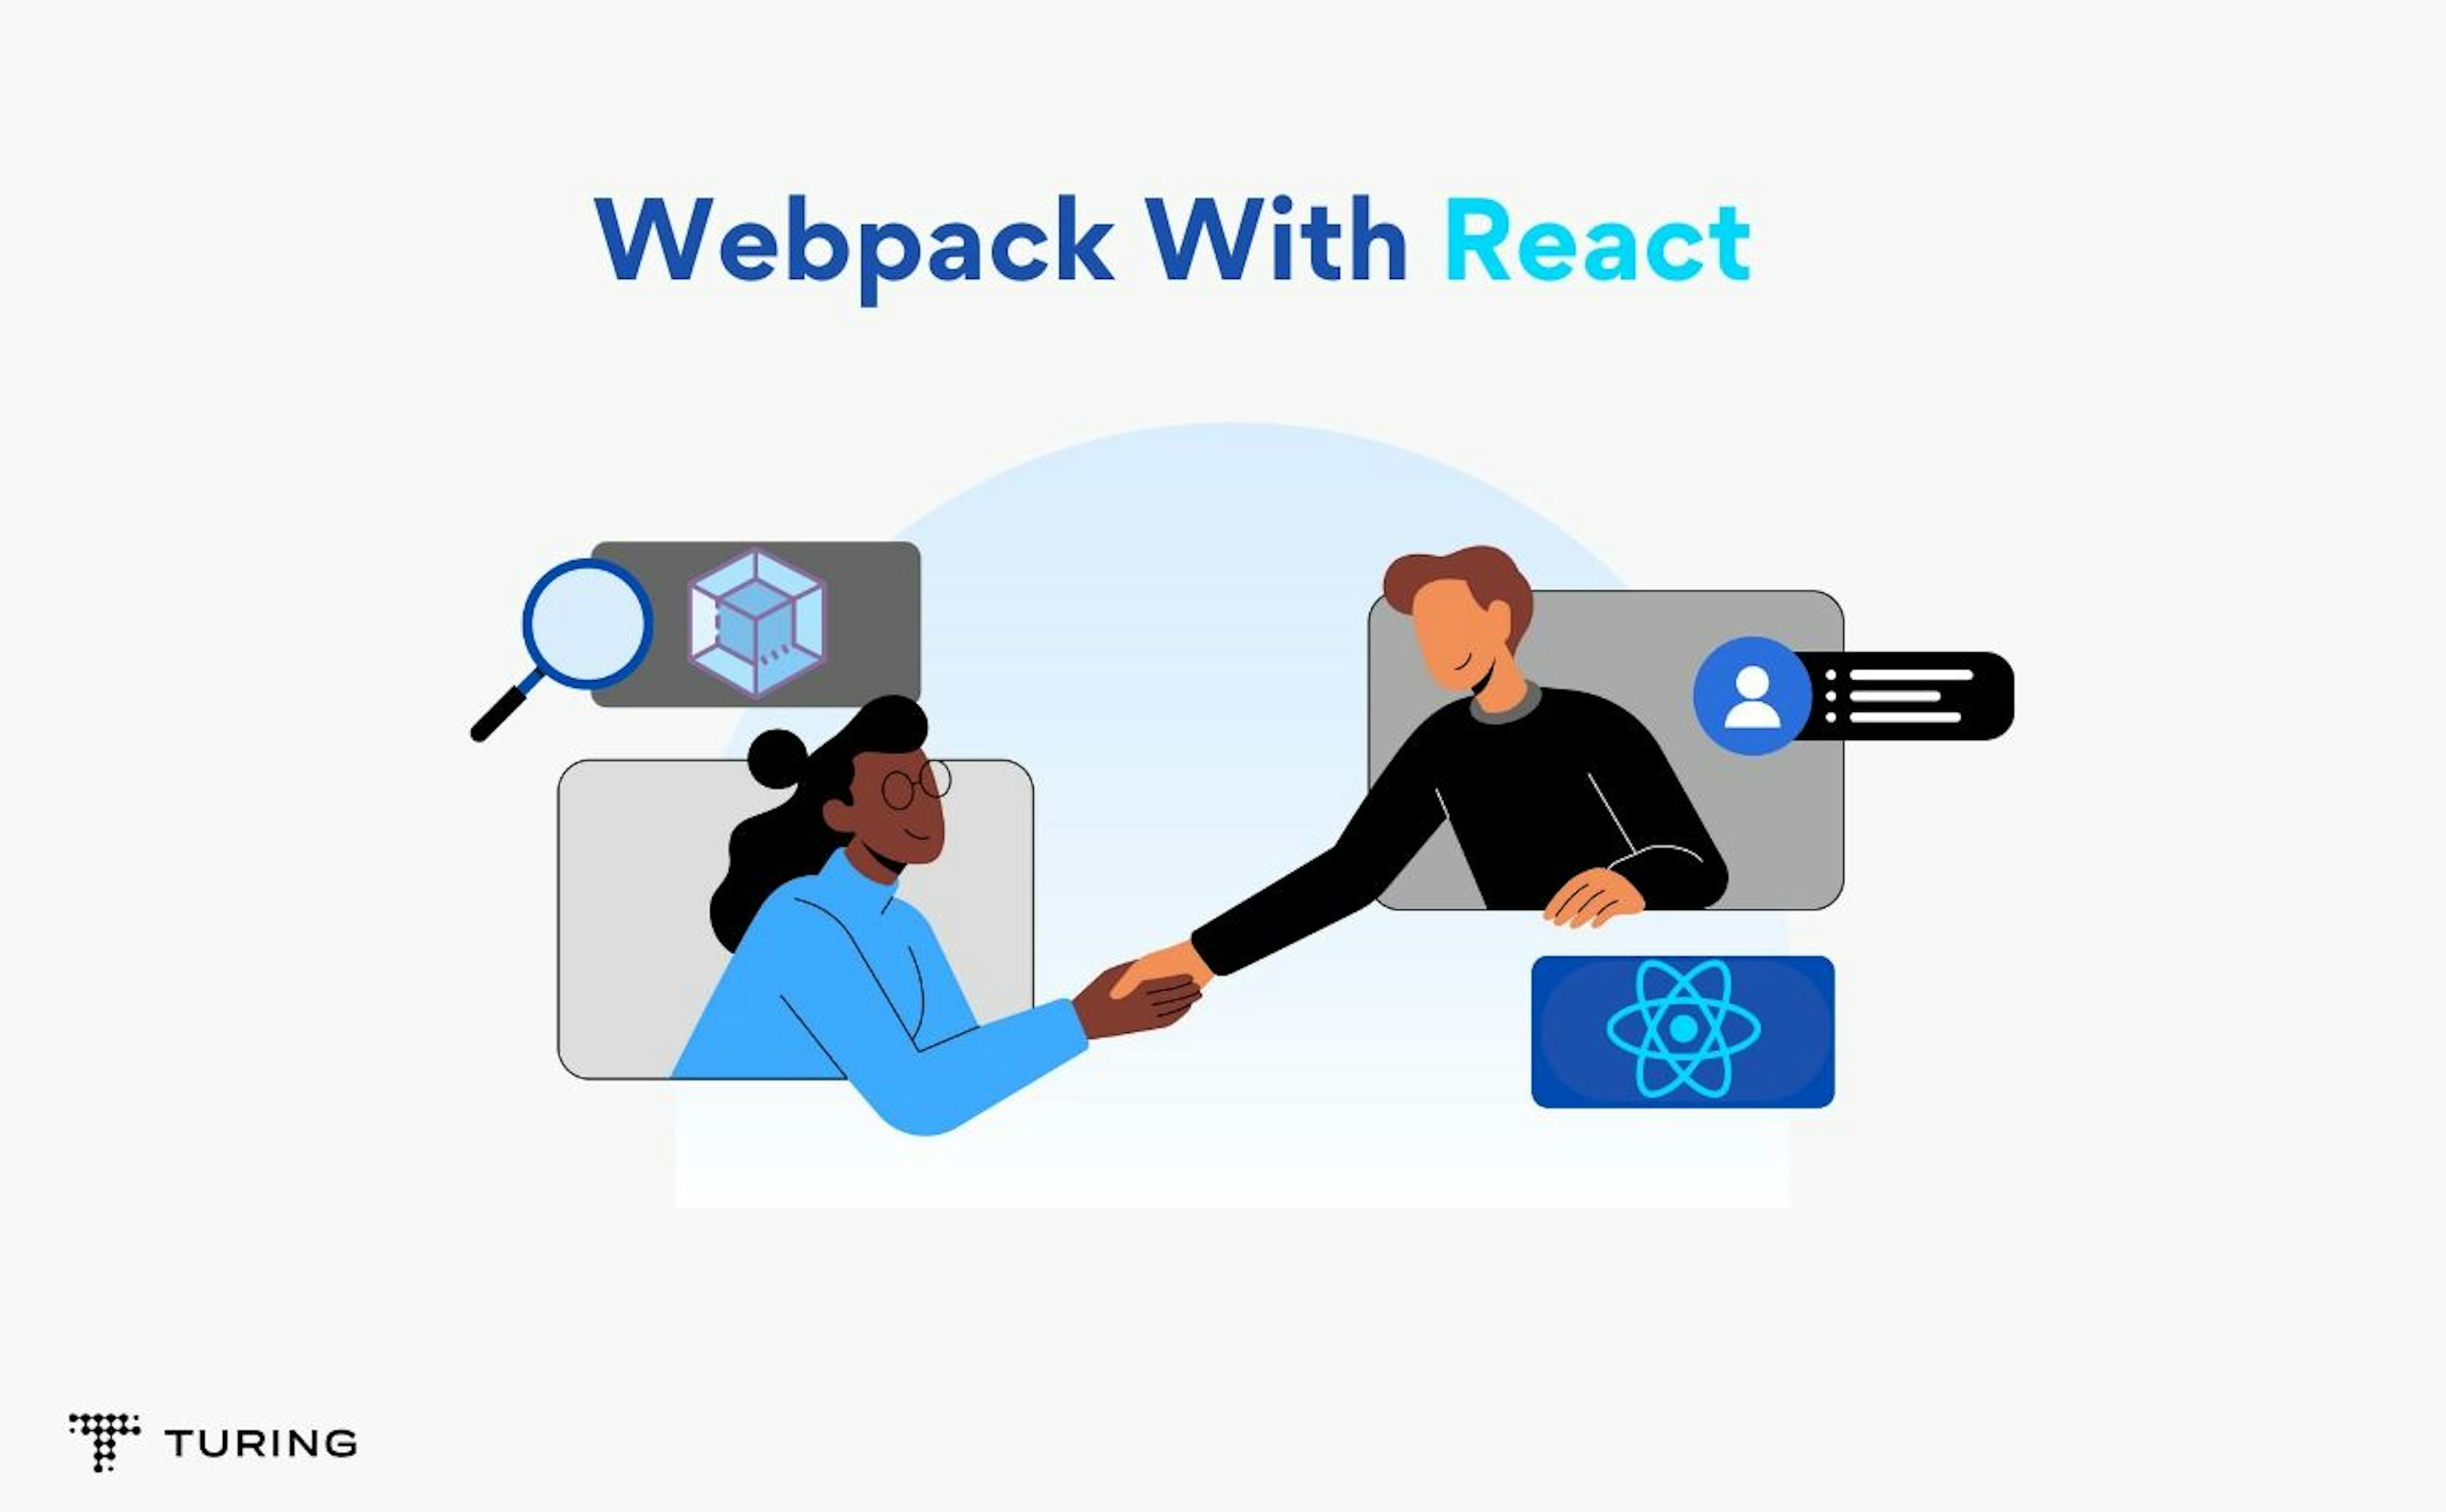 How to Use Webpack With React